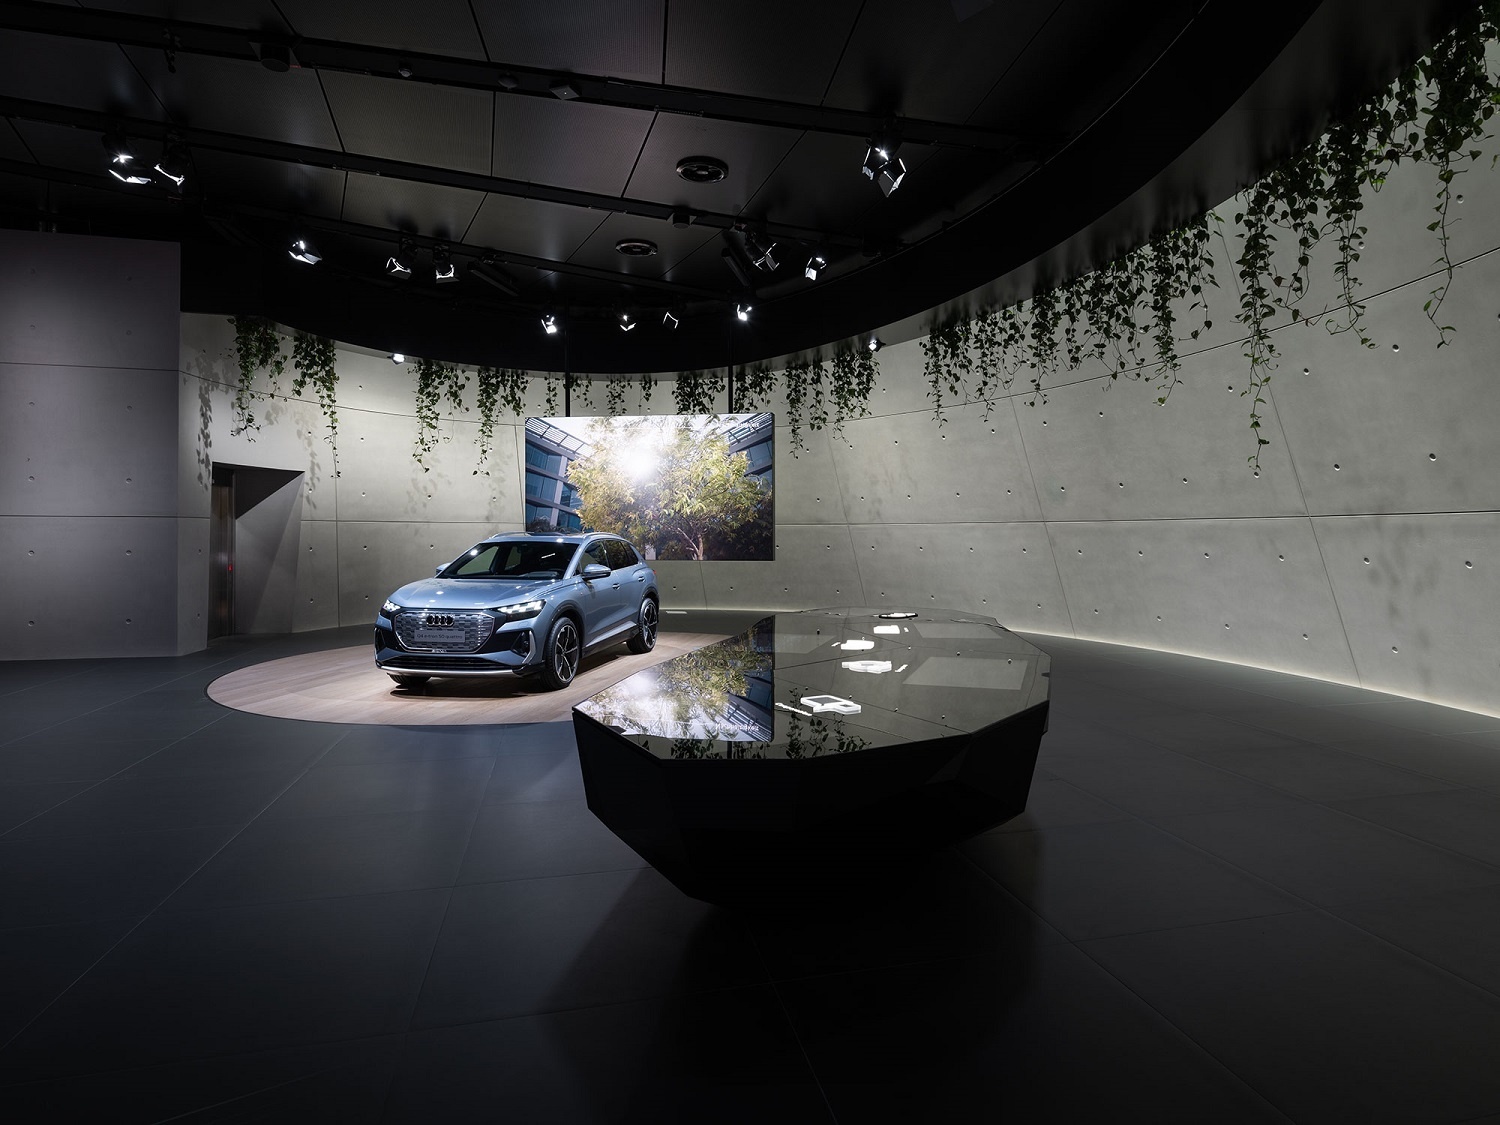 In addition to the Q4 e-tron, the "Sustainability Table" in the sustainability area of the Audi House of Progress Wolfsburg provides information on the circular economy and sustainable cooperation.